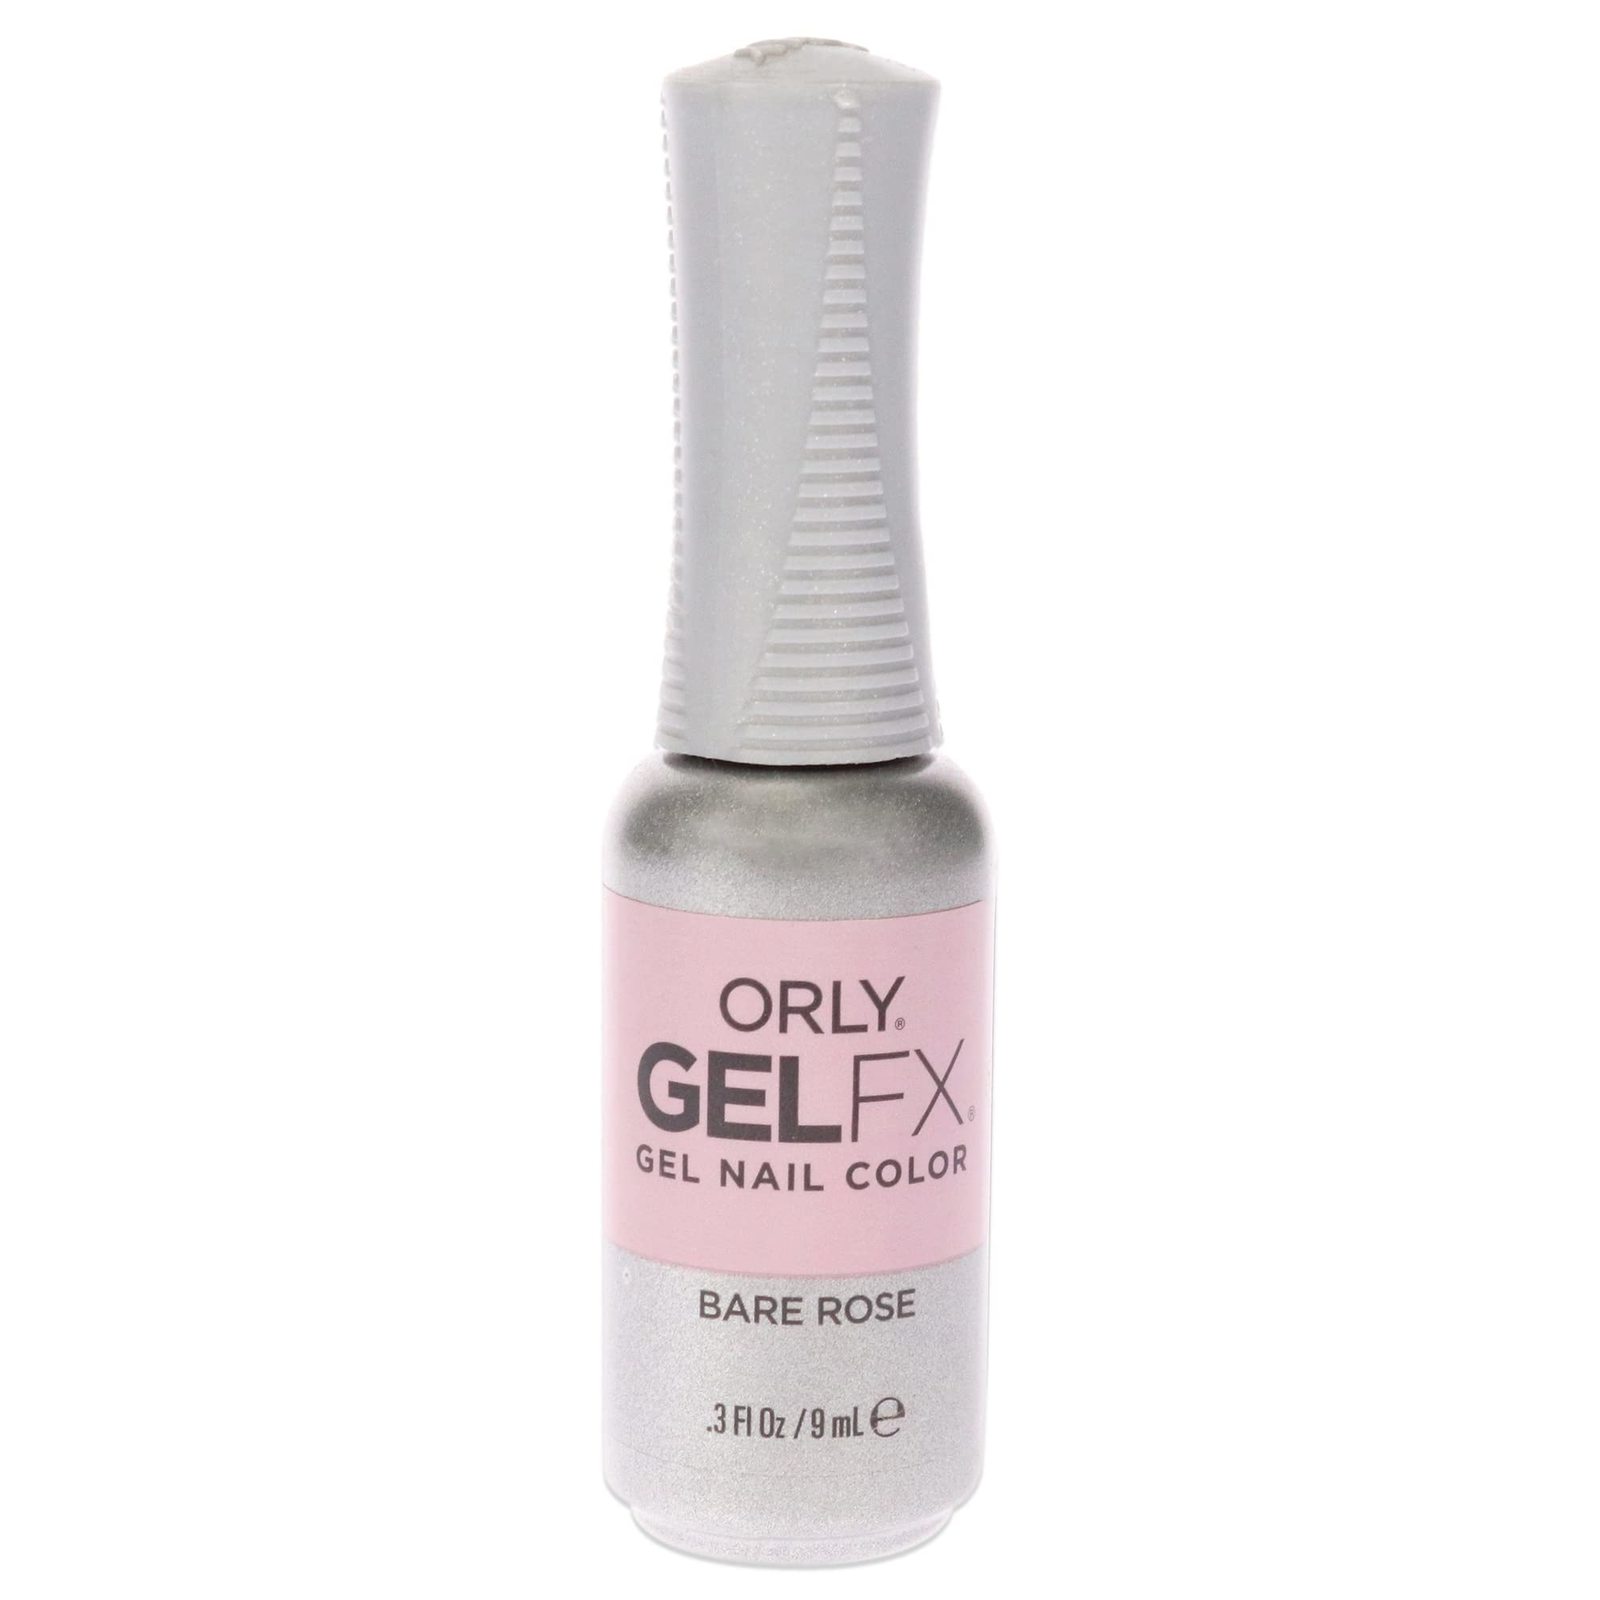 Gel Fx Gel Nail Color - 30927 Summer Fling by Orly for Women - 0.3 oz Nail Polis - $9.90